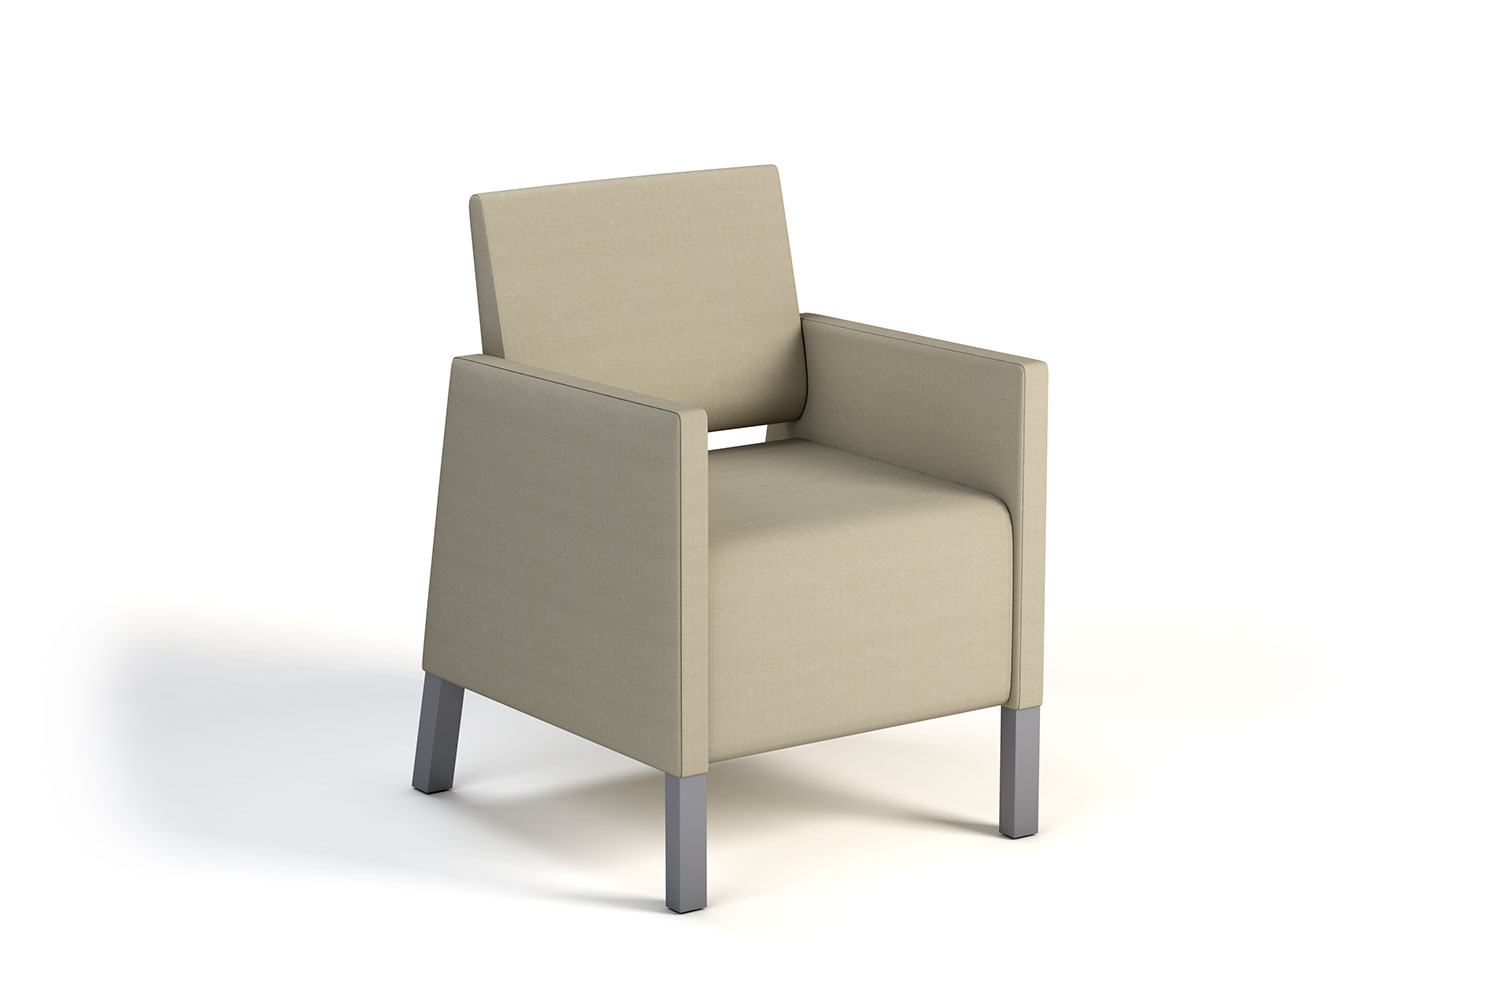 Valencia Metal Single Seat Upholstered Arms